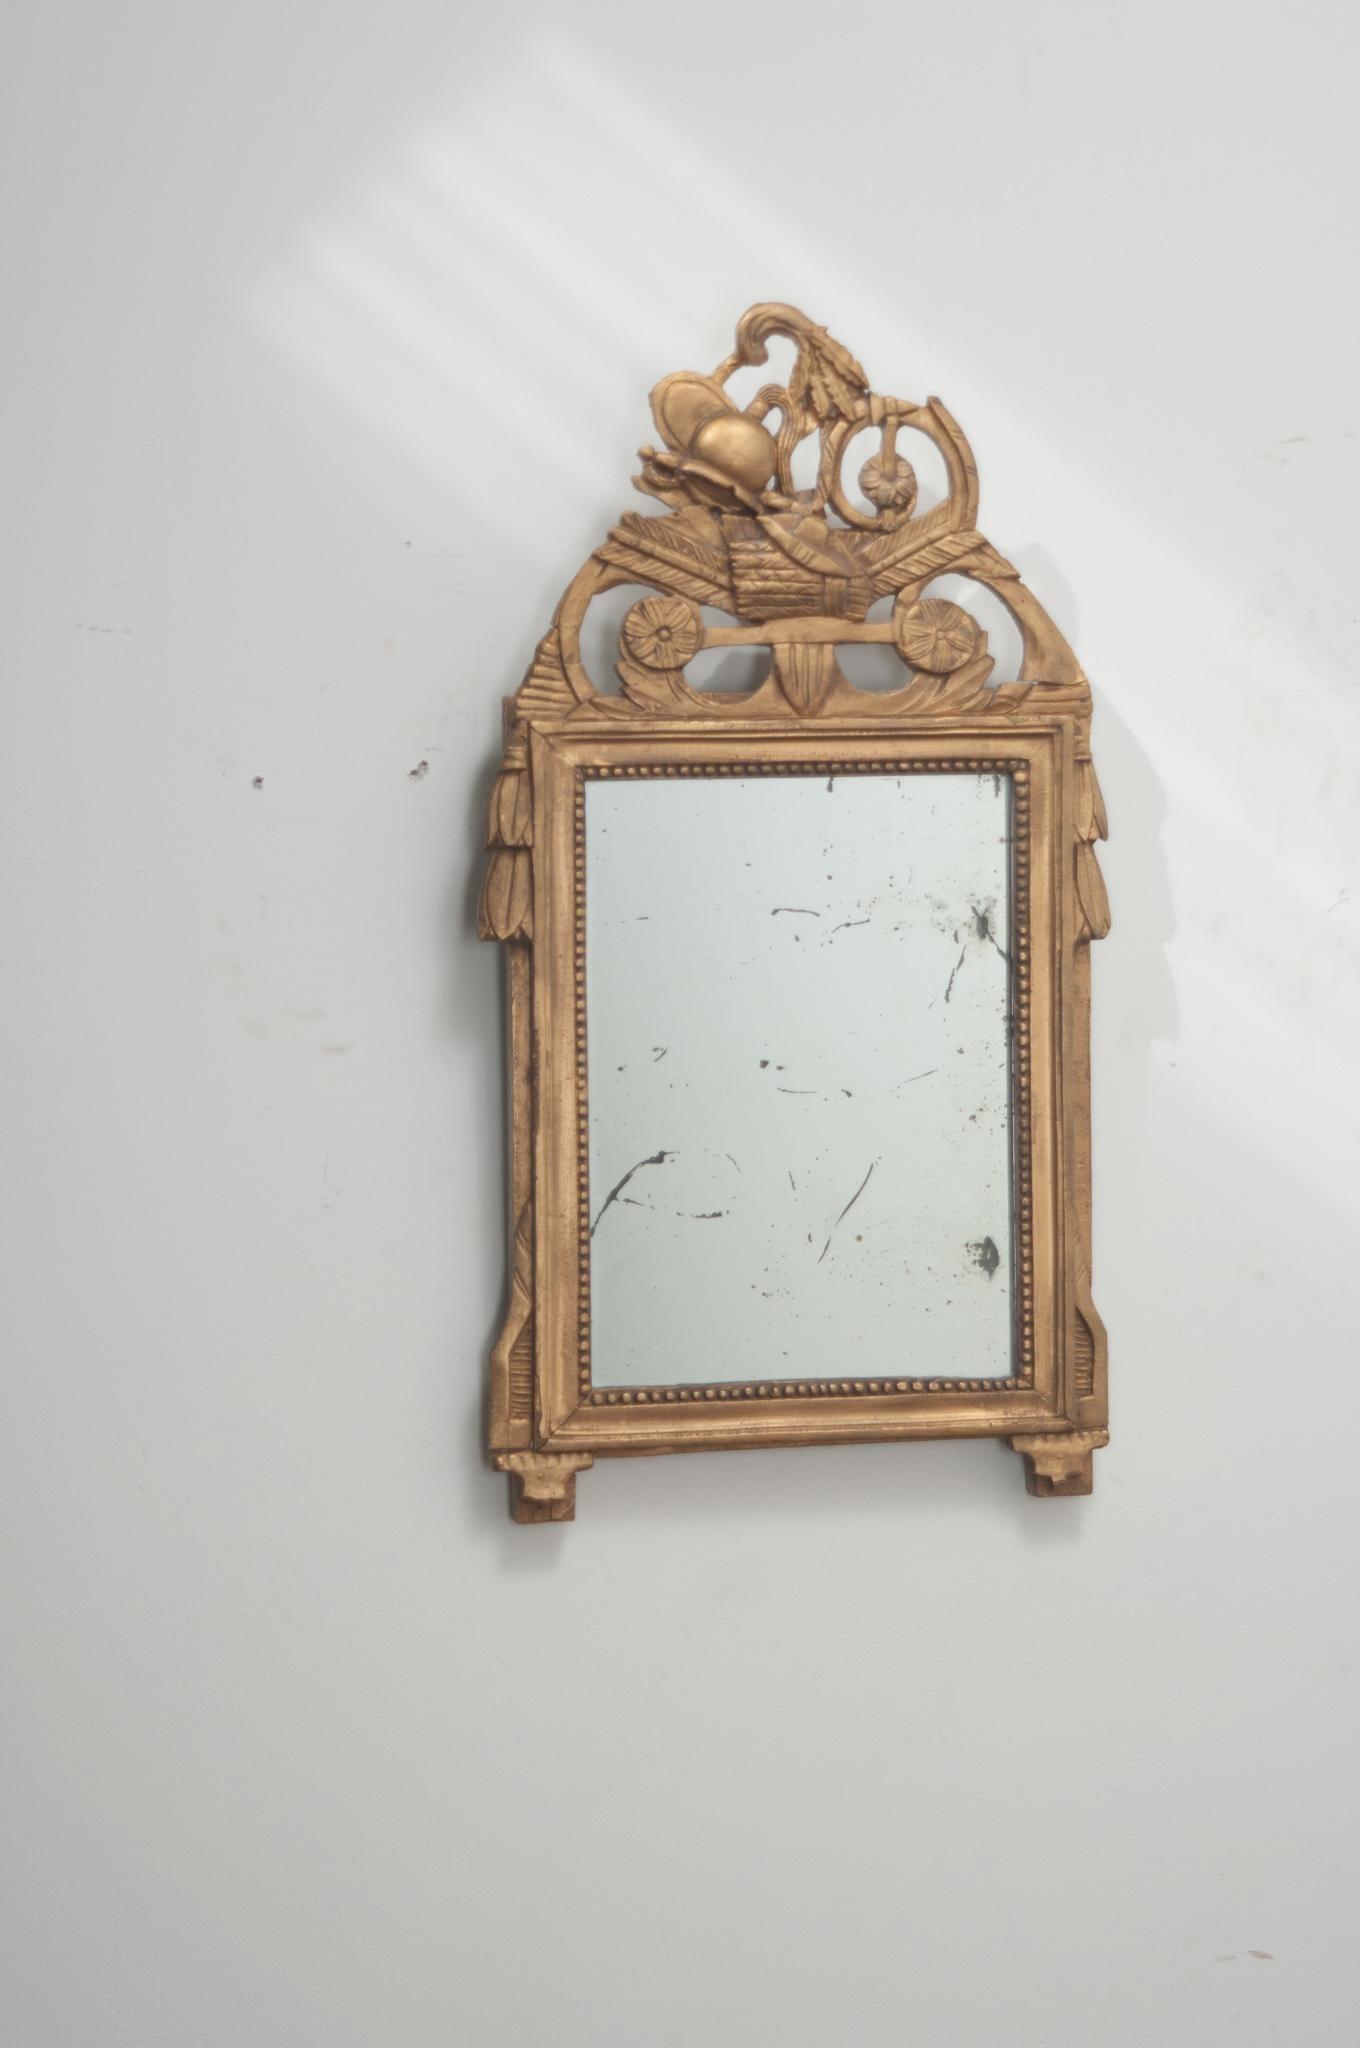 A French petite mirror is the Louis XVI style. The painted gilt carved frame has a pierced crest depicting a military helmet, sword, shield, quivers and ax. The original mirror plate is surrounded by the mirror frame’s beaded trim. Some repairs have